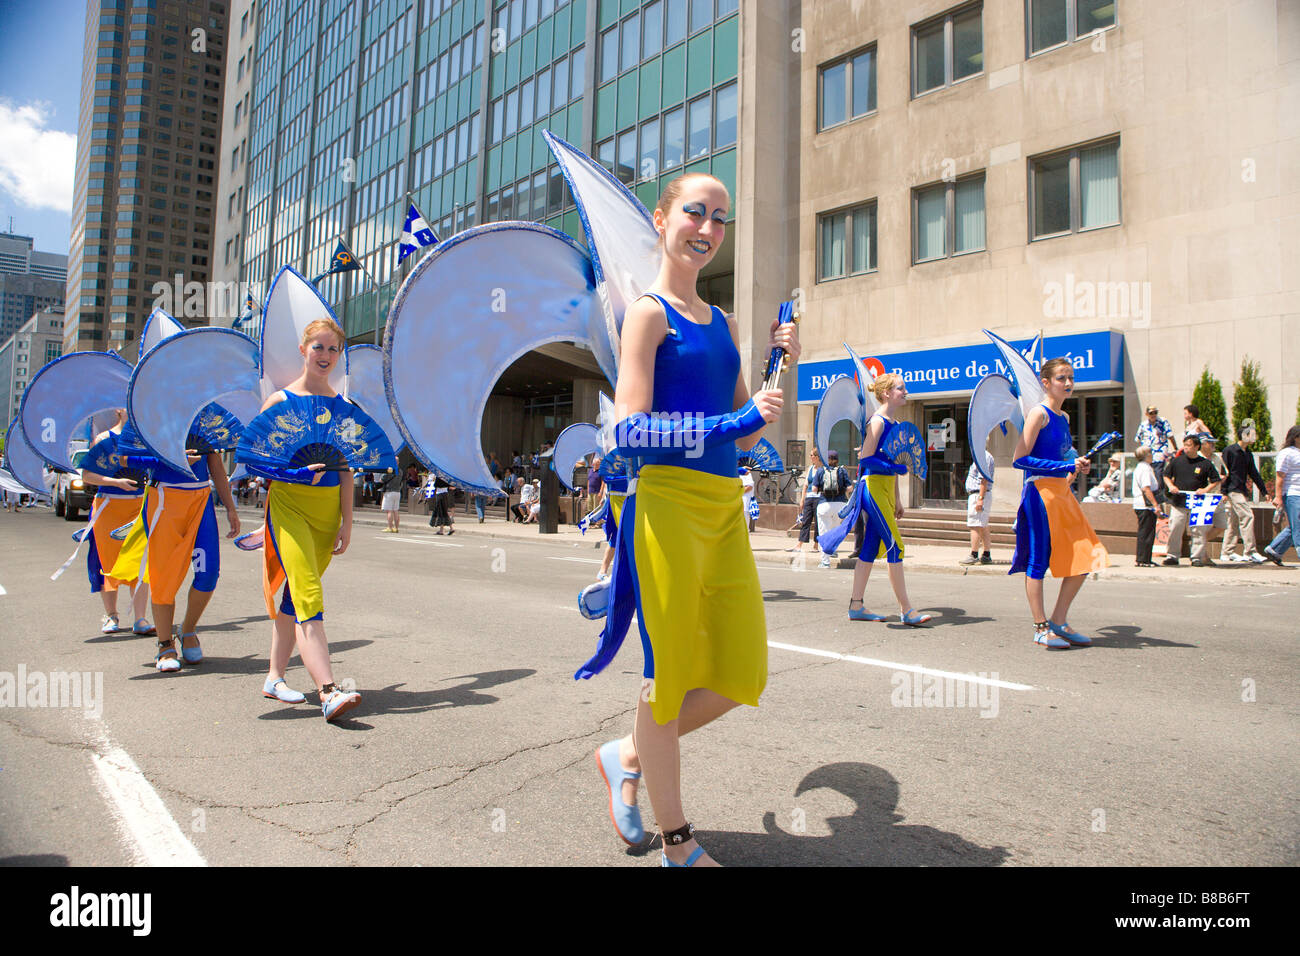 St jean parade montreal canada hi-res stock photography and images - Alamy